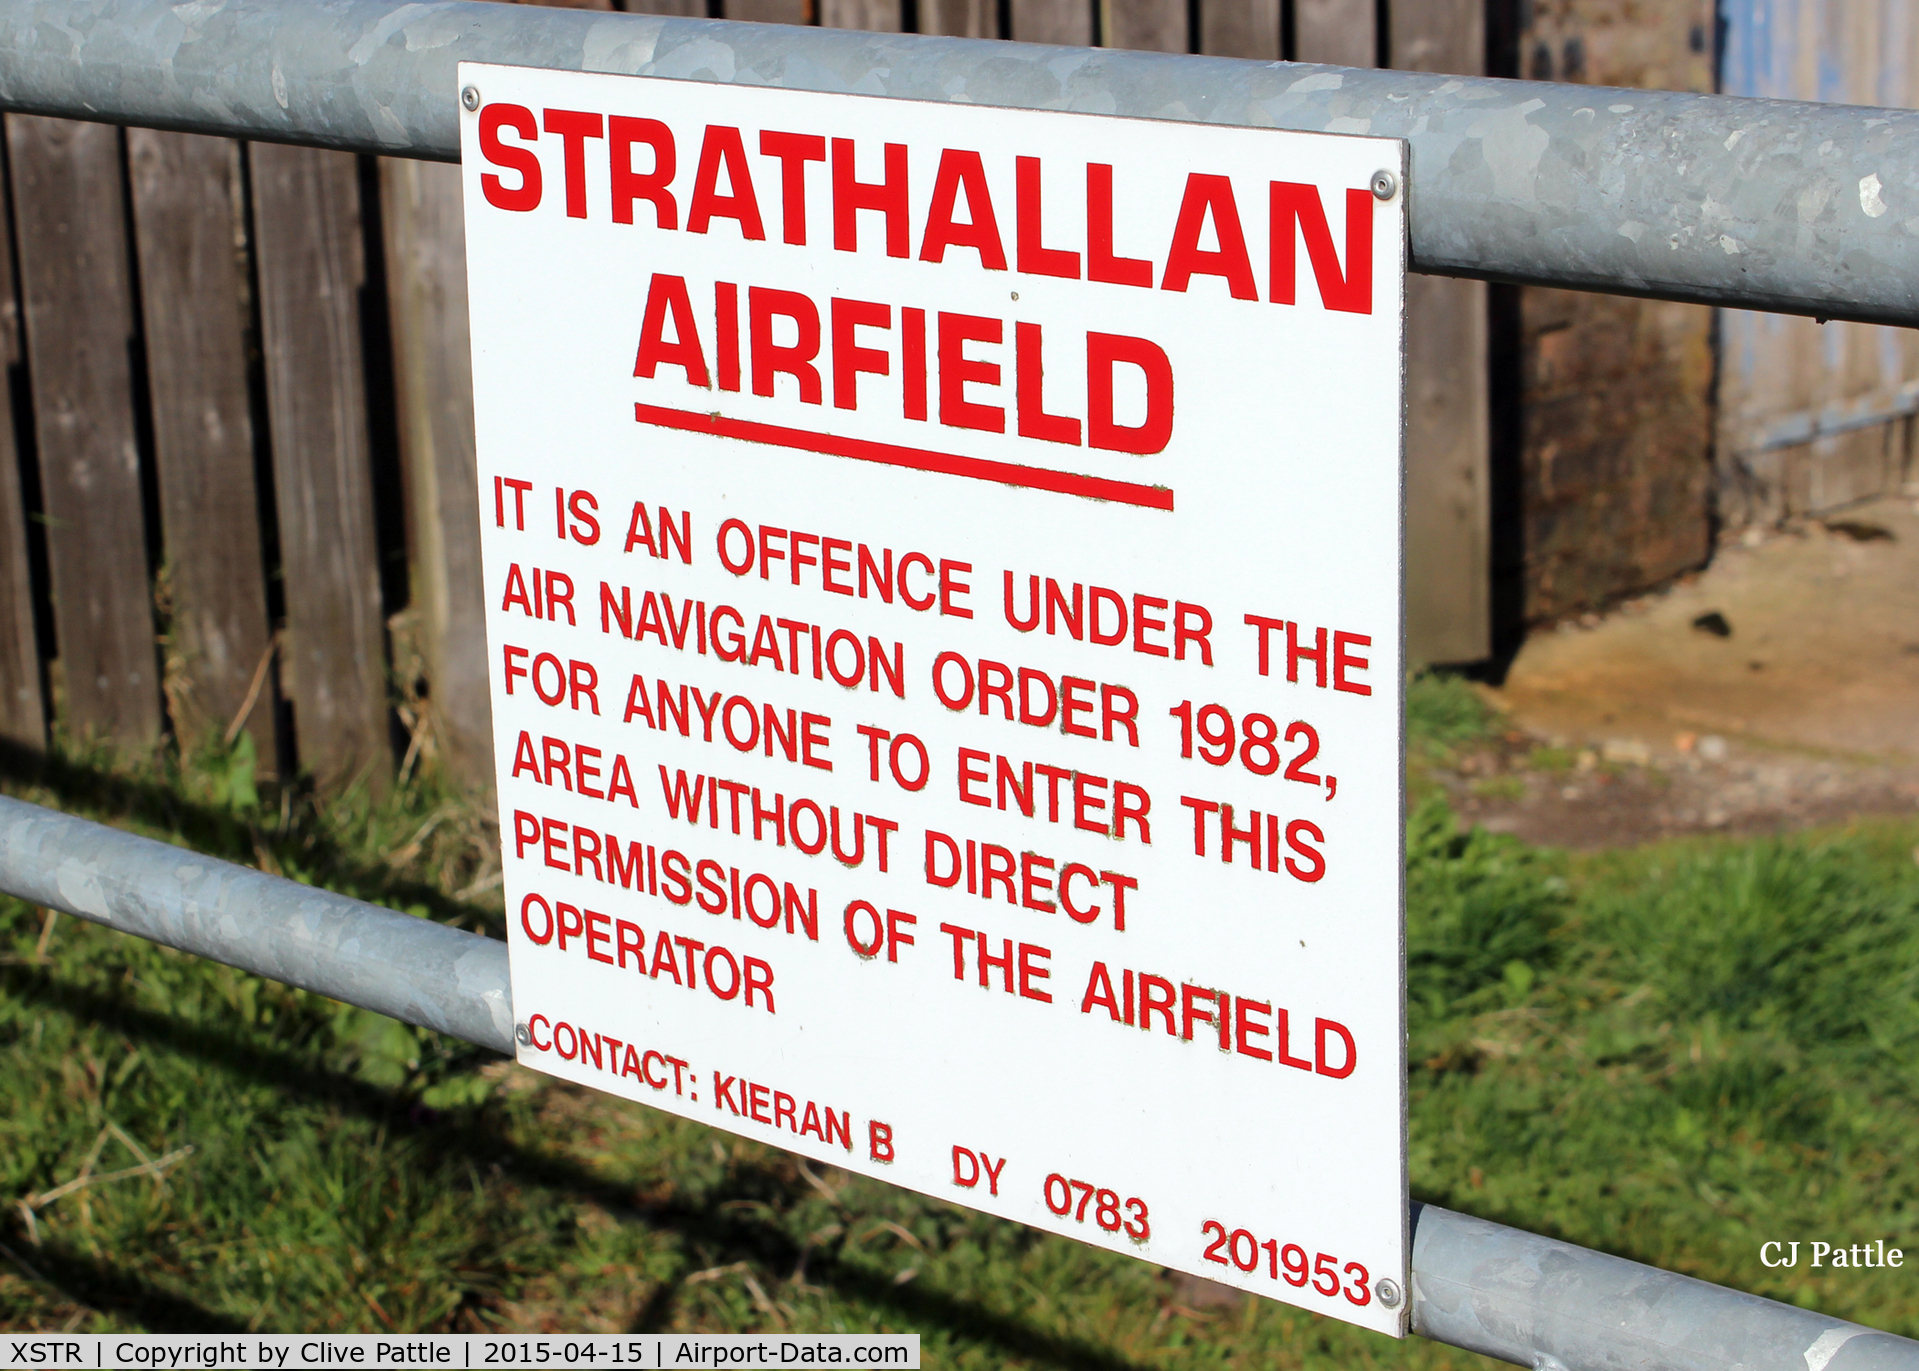 XSTR Airport - Airfield sign (modified for privacy reasons) at Strathallan Airfield, XSTR, near Auchterarder, Perthshire, Scotland - the home of Skydive Scotland